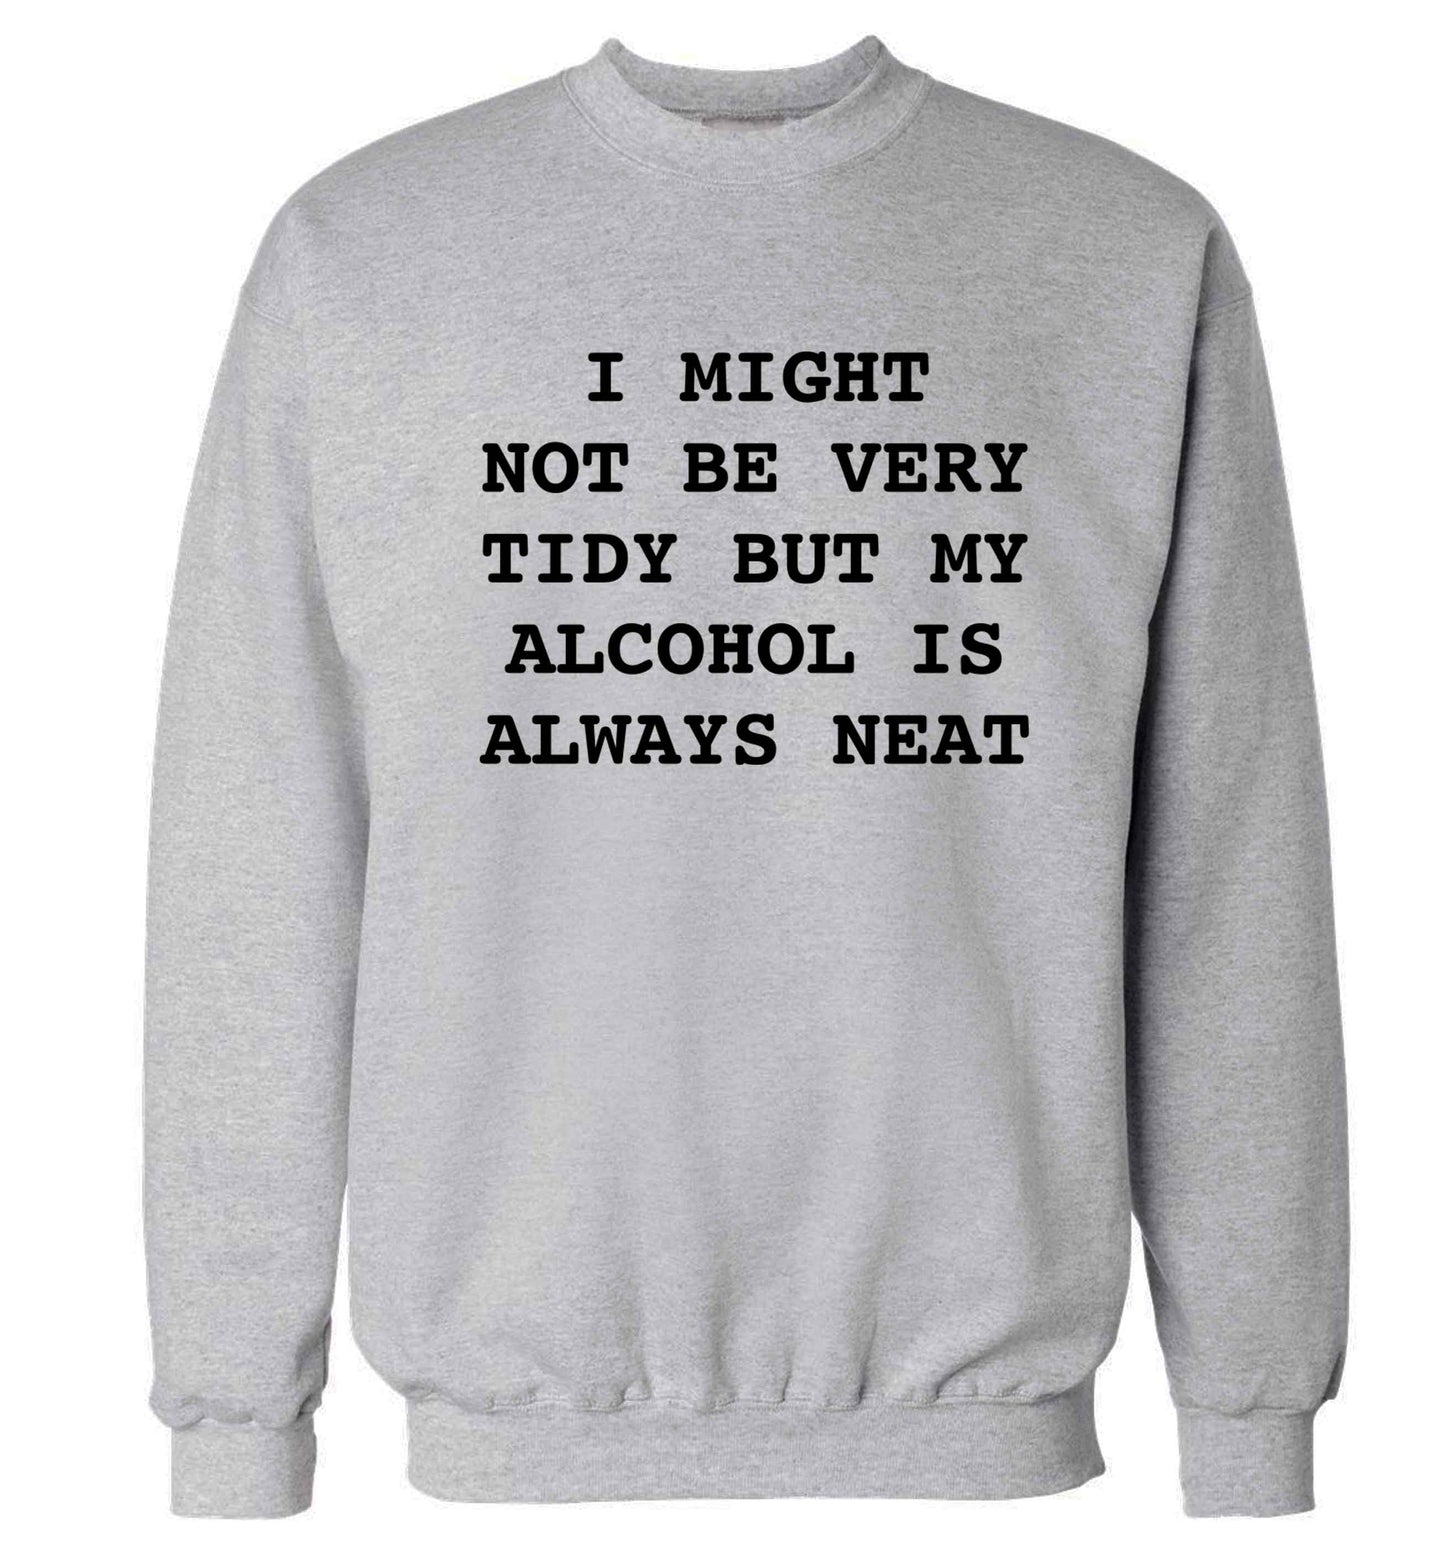 I might not be tidy but my alcohol is always neat Adult's unisex grey Sweater 2XL